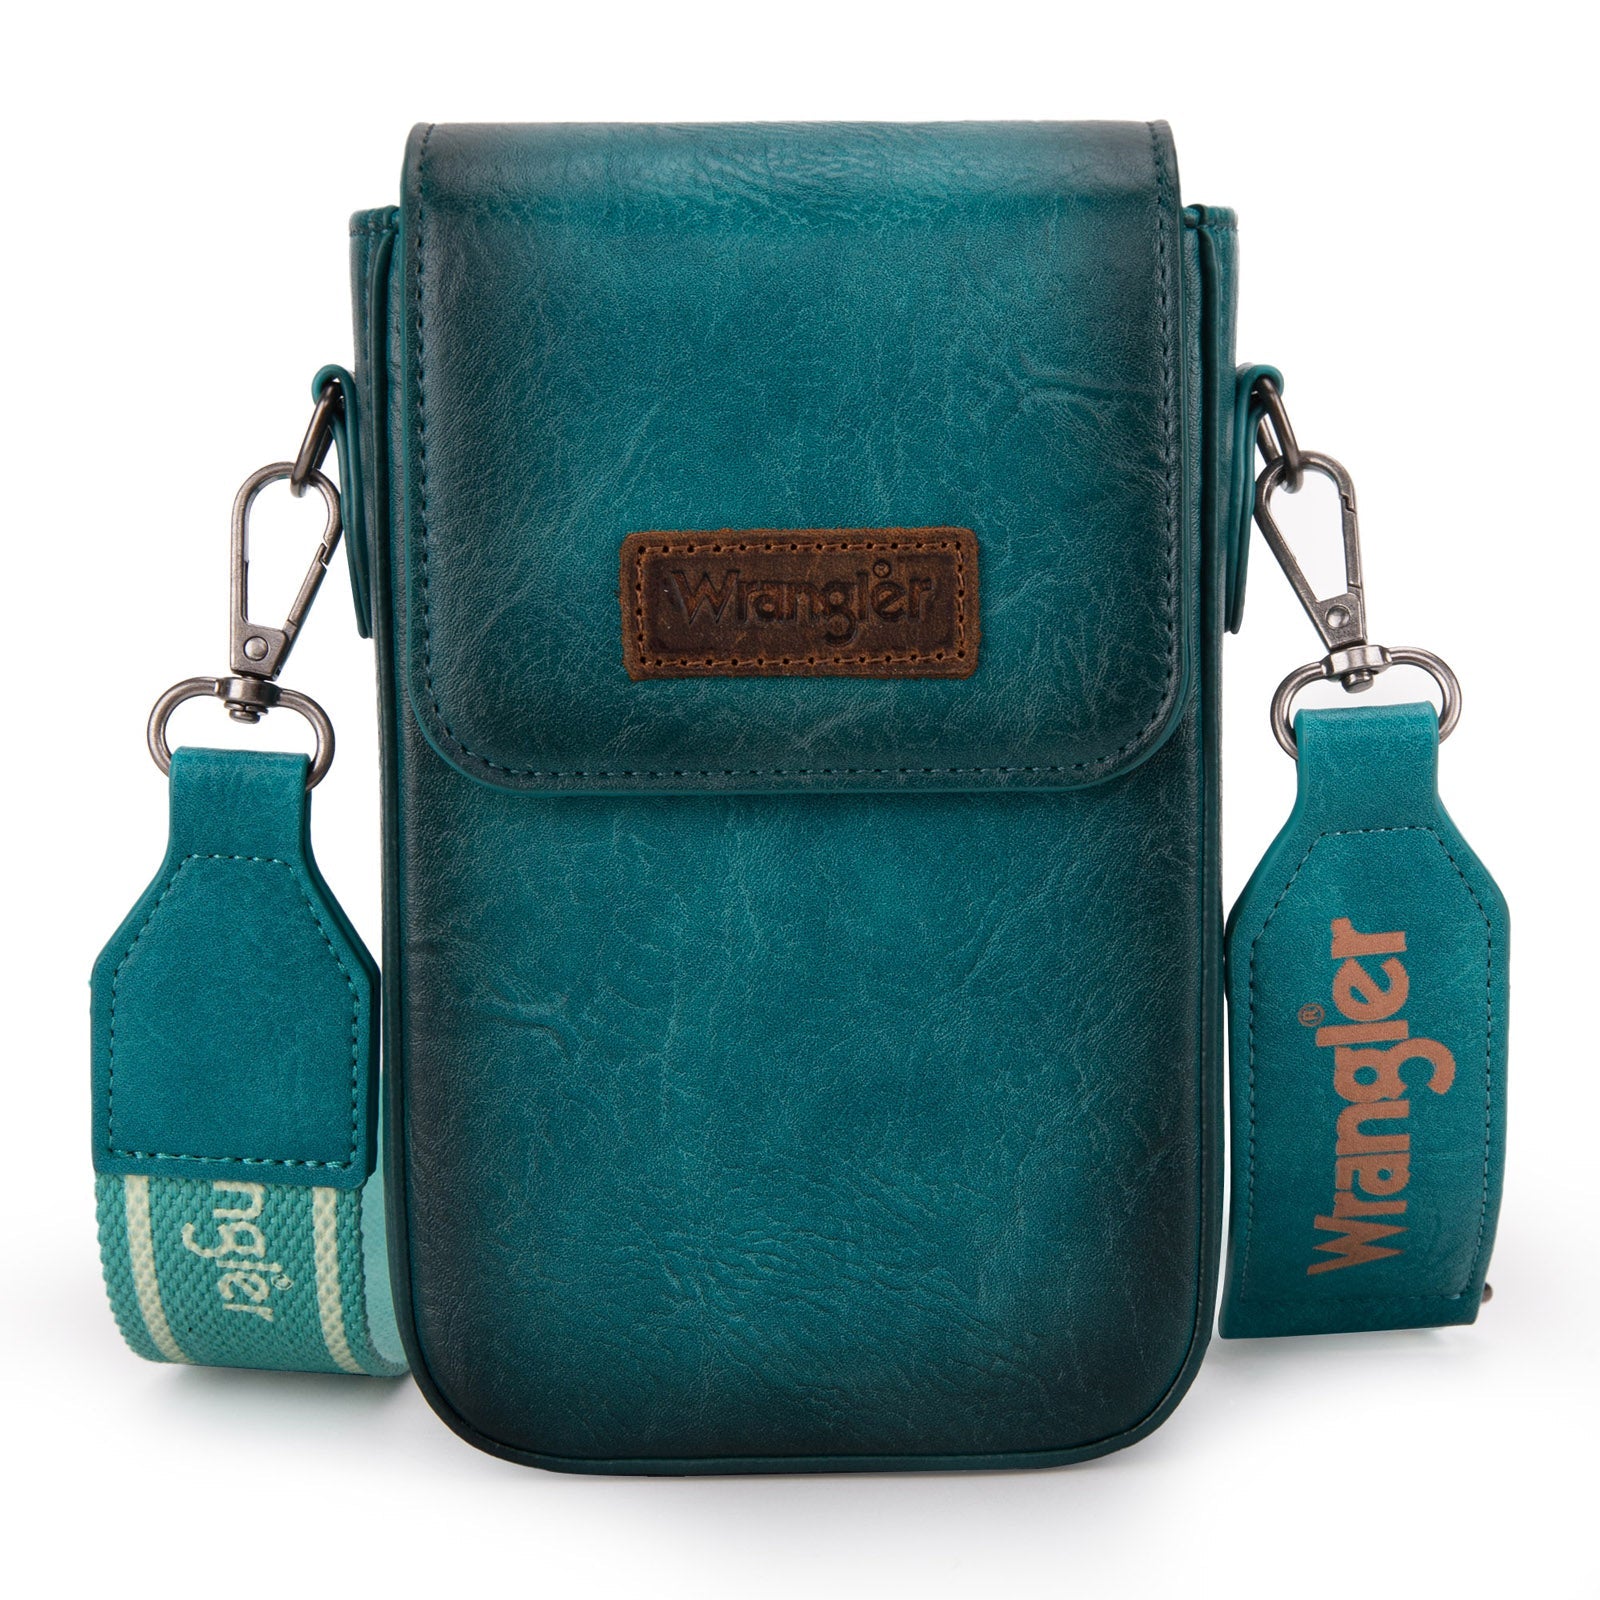 WG118-204  Wrangler Crossbody Cell Phone Purse With Back Card Slots - Turquoise